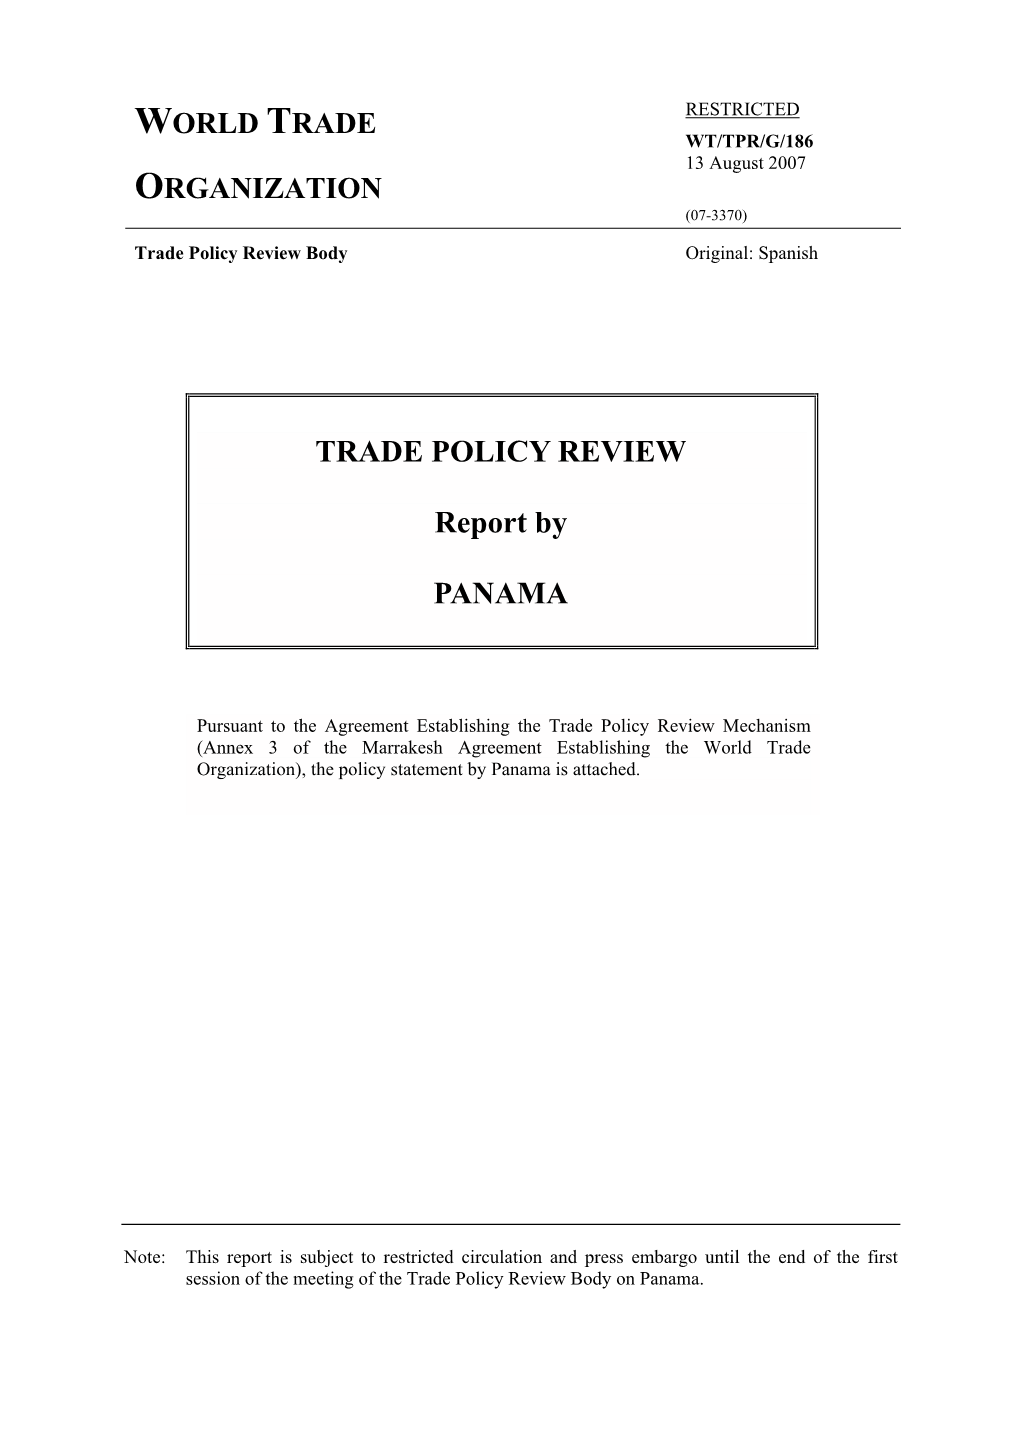 TRADE POLICY REVIEW Report by PANAMA